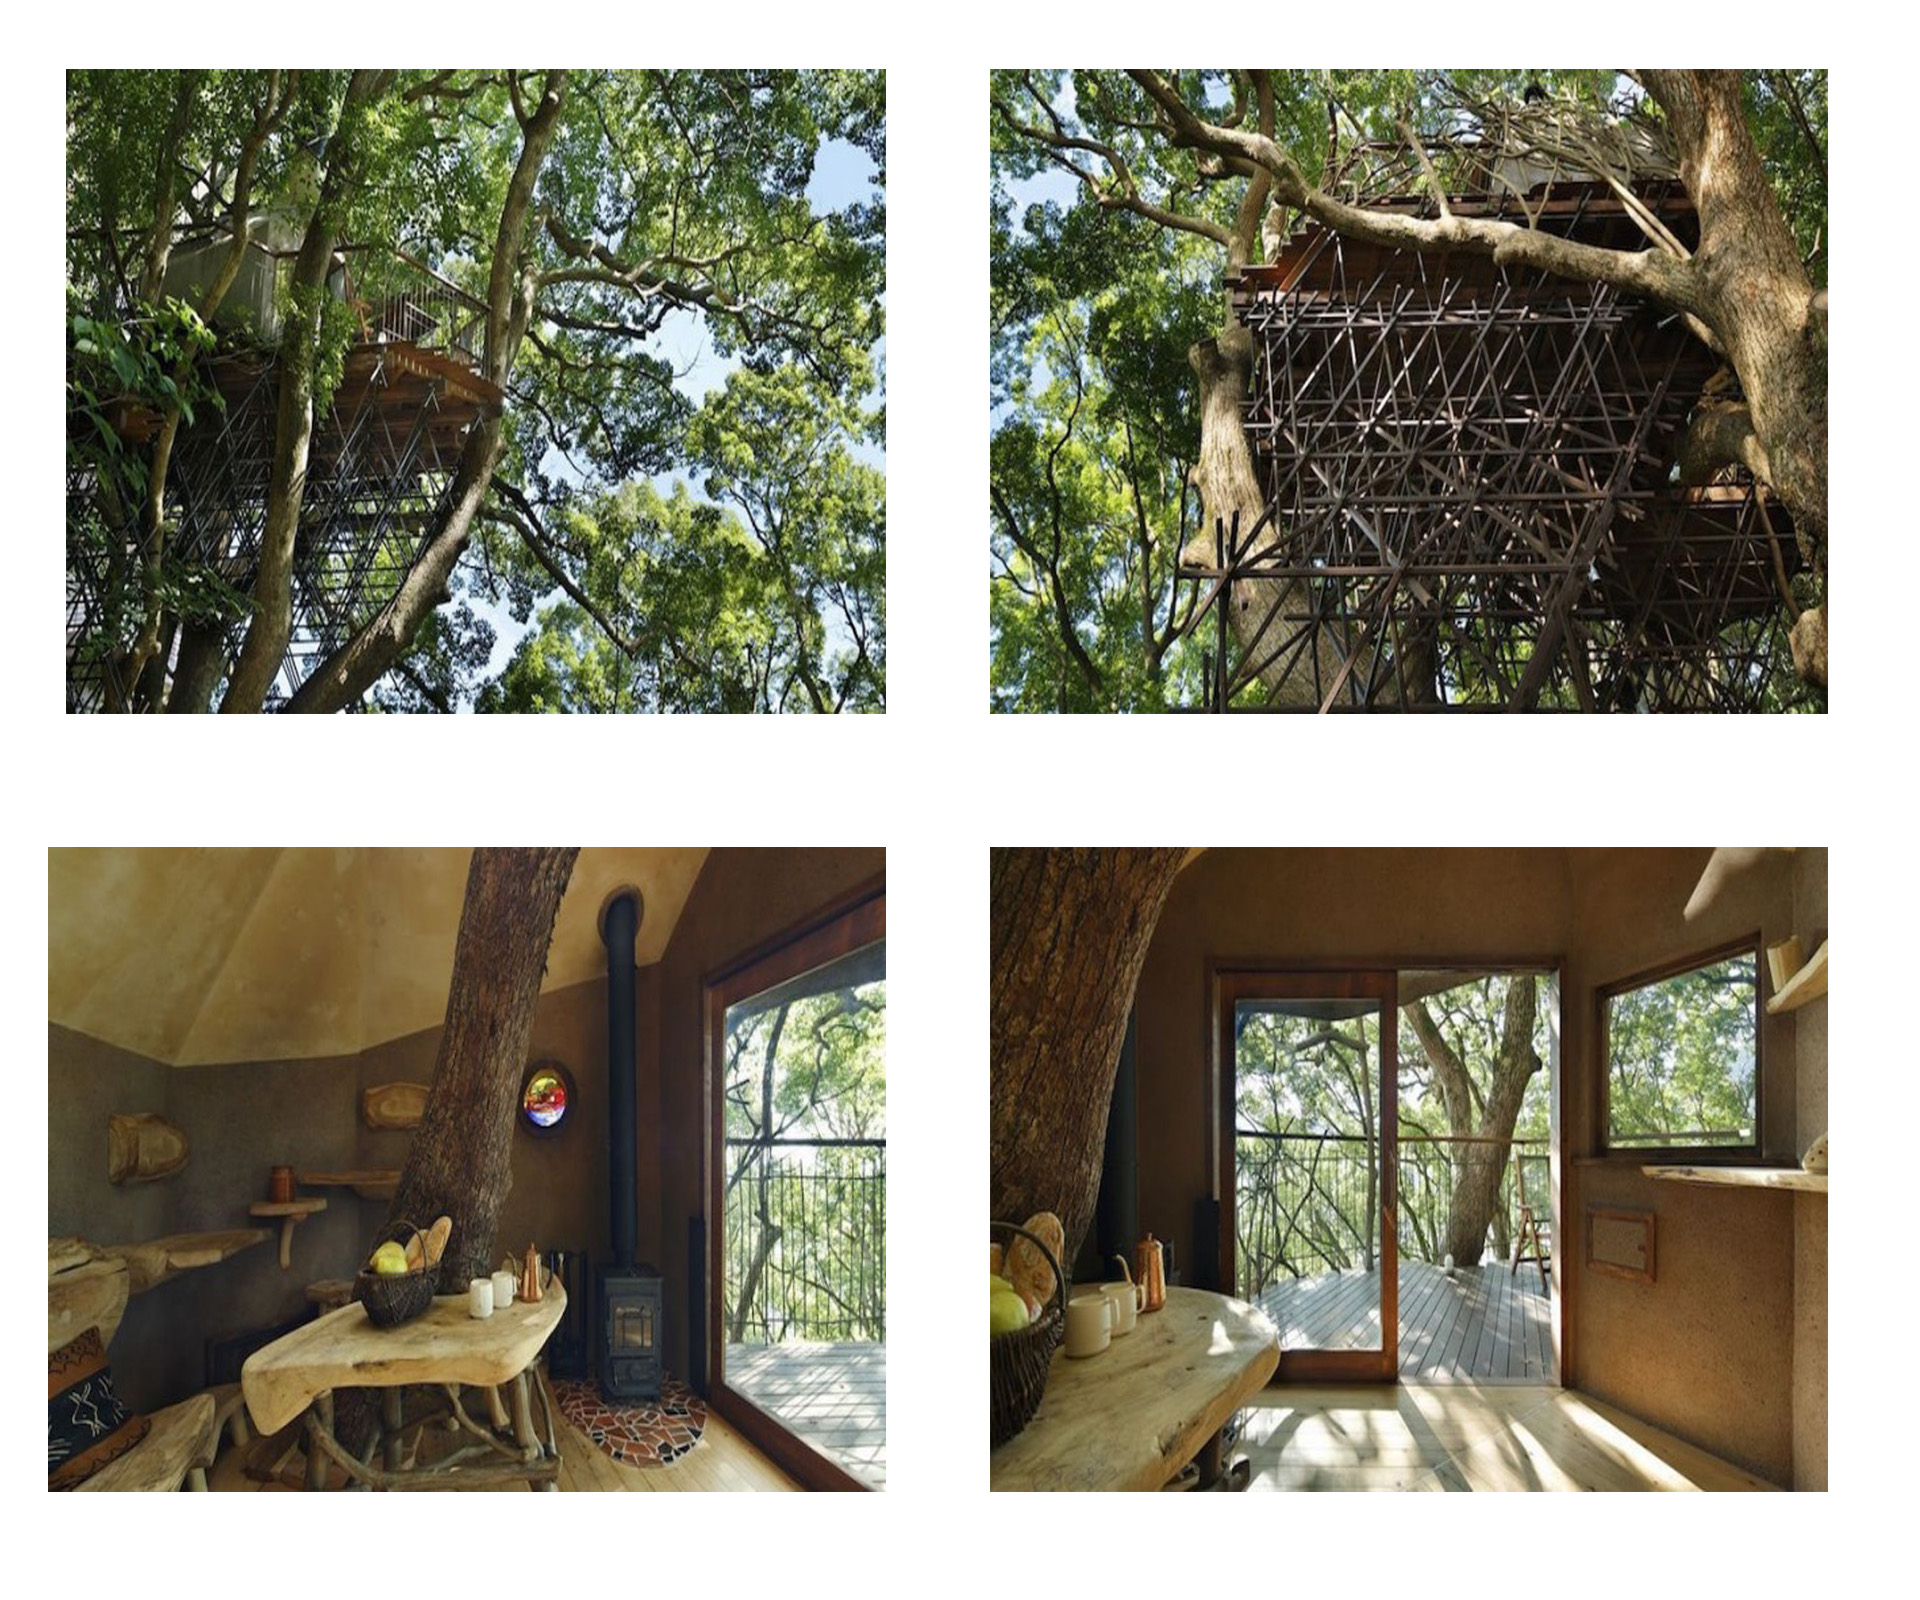 Is this the world’s best tree house?